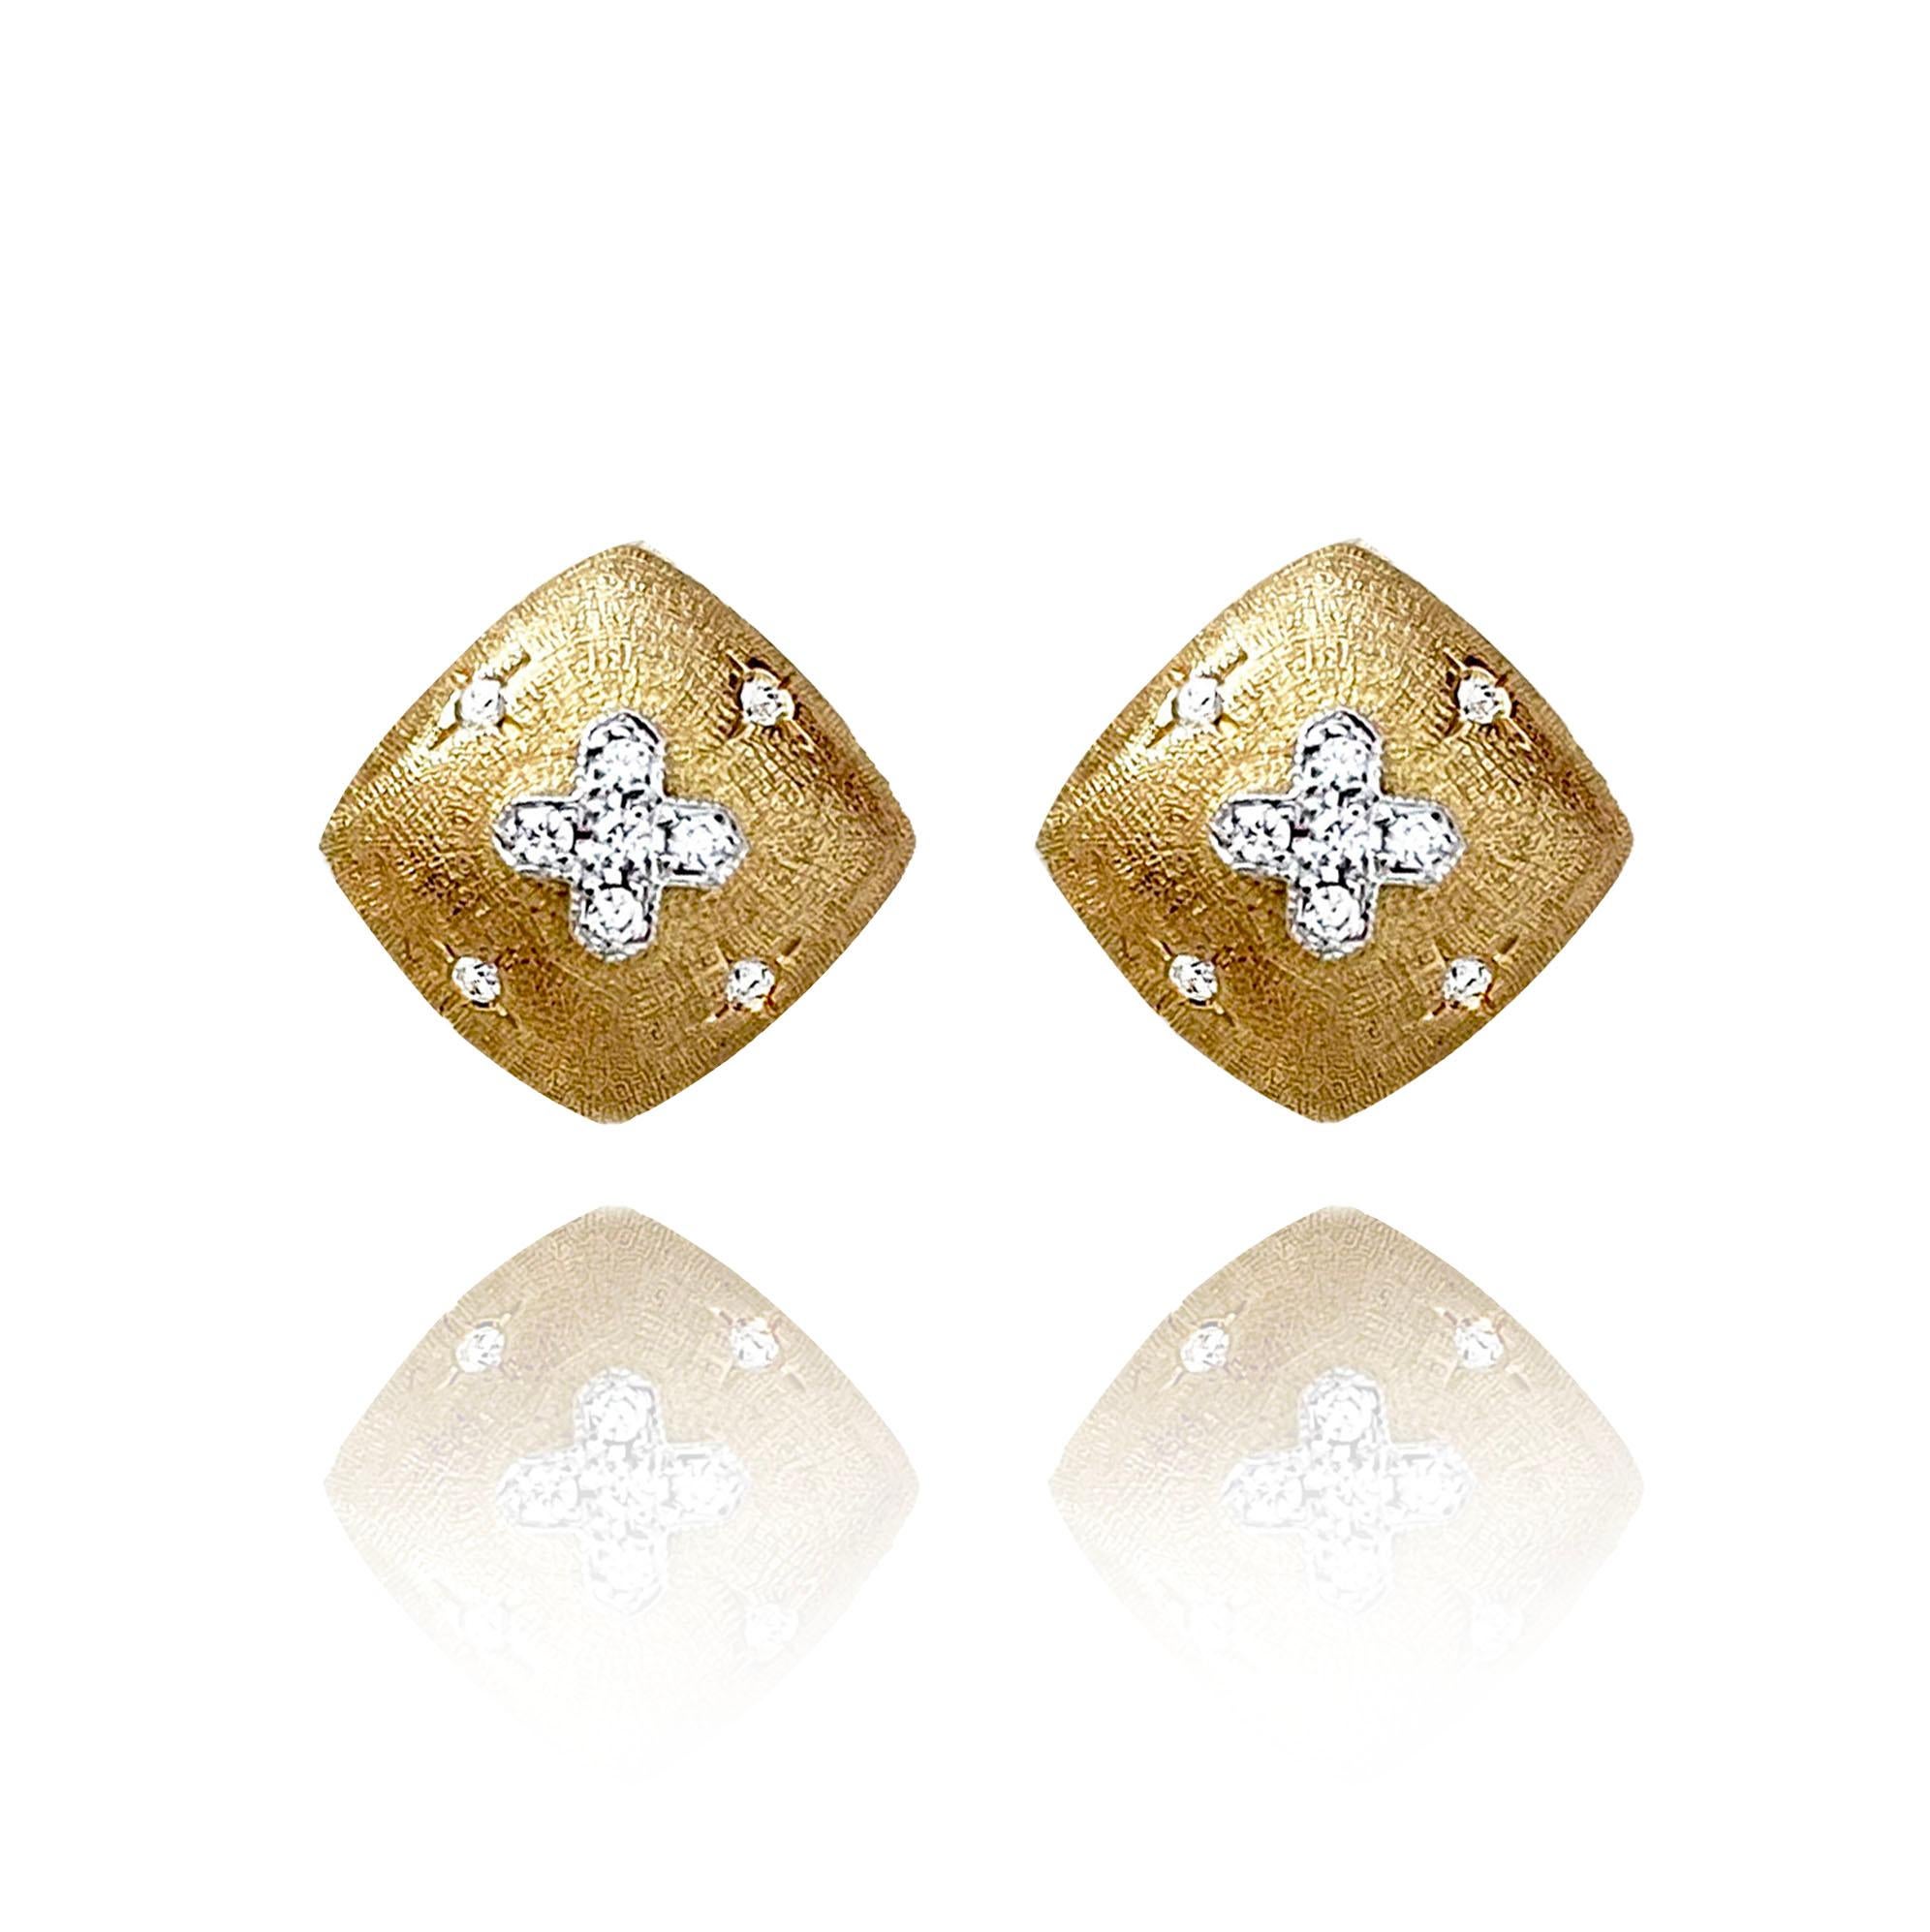 Produced by award winning Italian designer Stefano Vitolo. Stefano creates custom artisanal one of a kind jewelry with excellent gemstones in a truly old world Italian craftmanship.
These handcrafted earring have 0.28 total carat weight of F/G